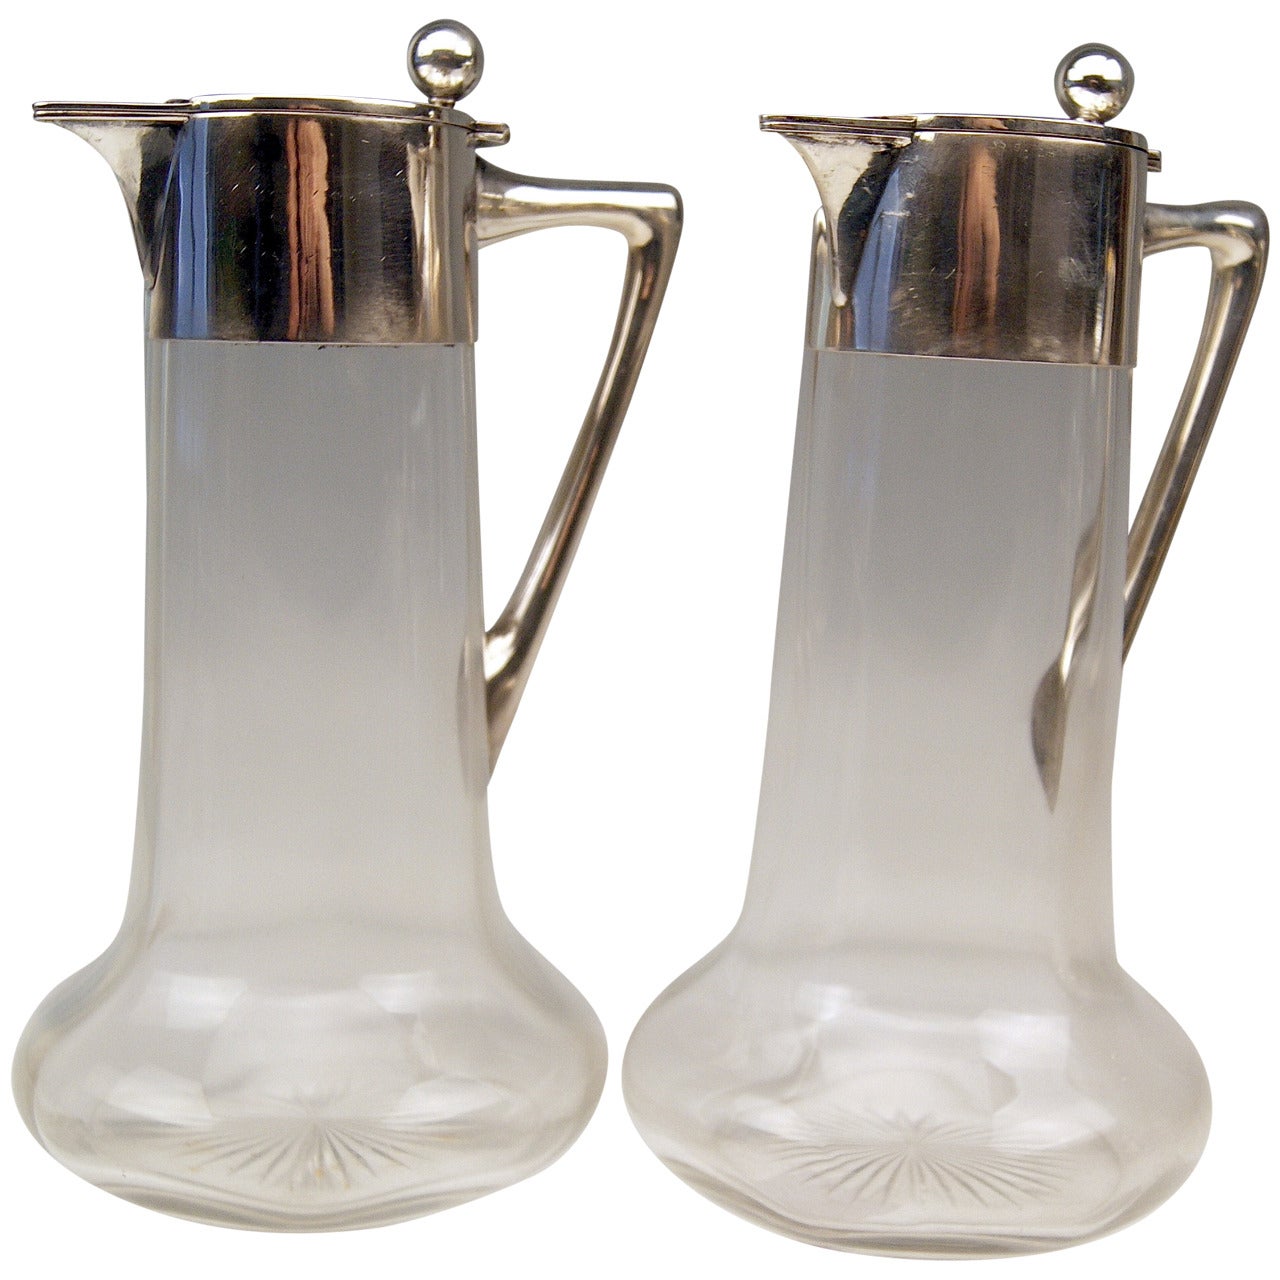 German Silver Glass Decanter Carafes with Silver Mounting by W. Binder c.1900